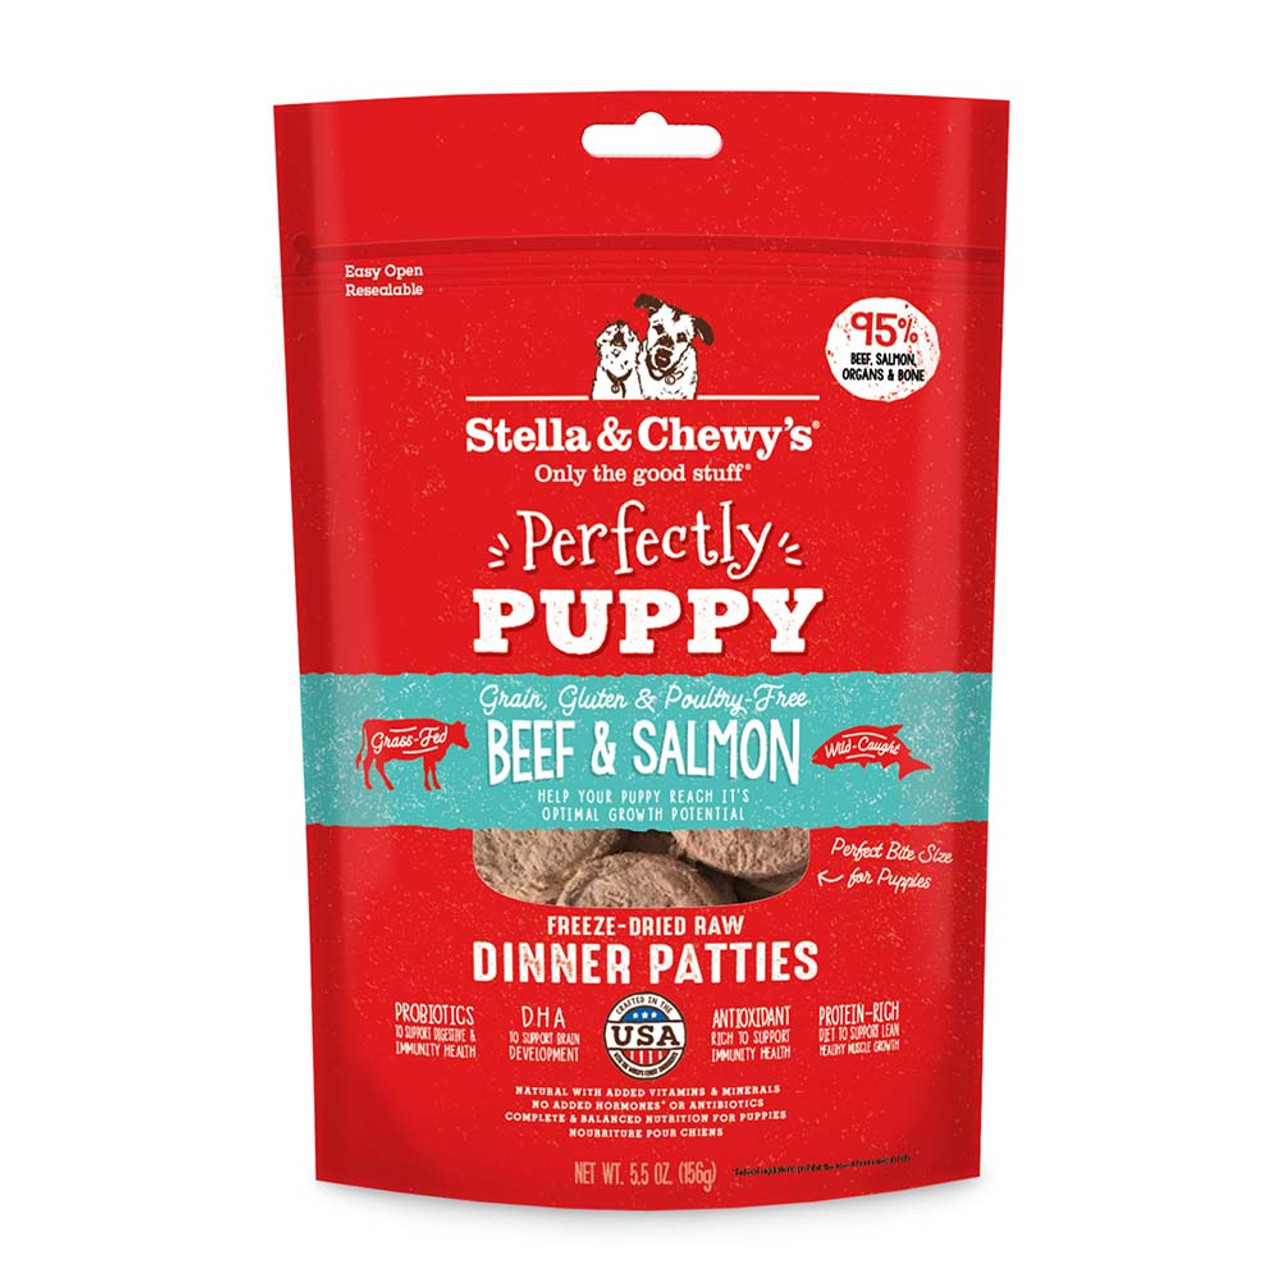 Stella & Chewy's Perfectly Puppy Beef & Salmon Dinner Patties Freeze-Dried Raw Dog Food - Front, 5.5 oz